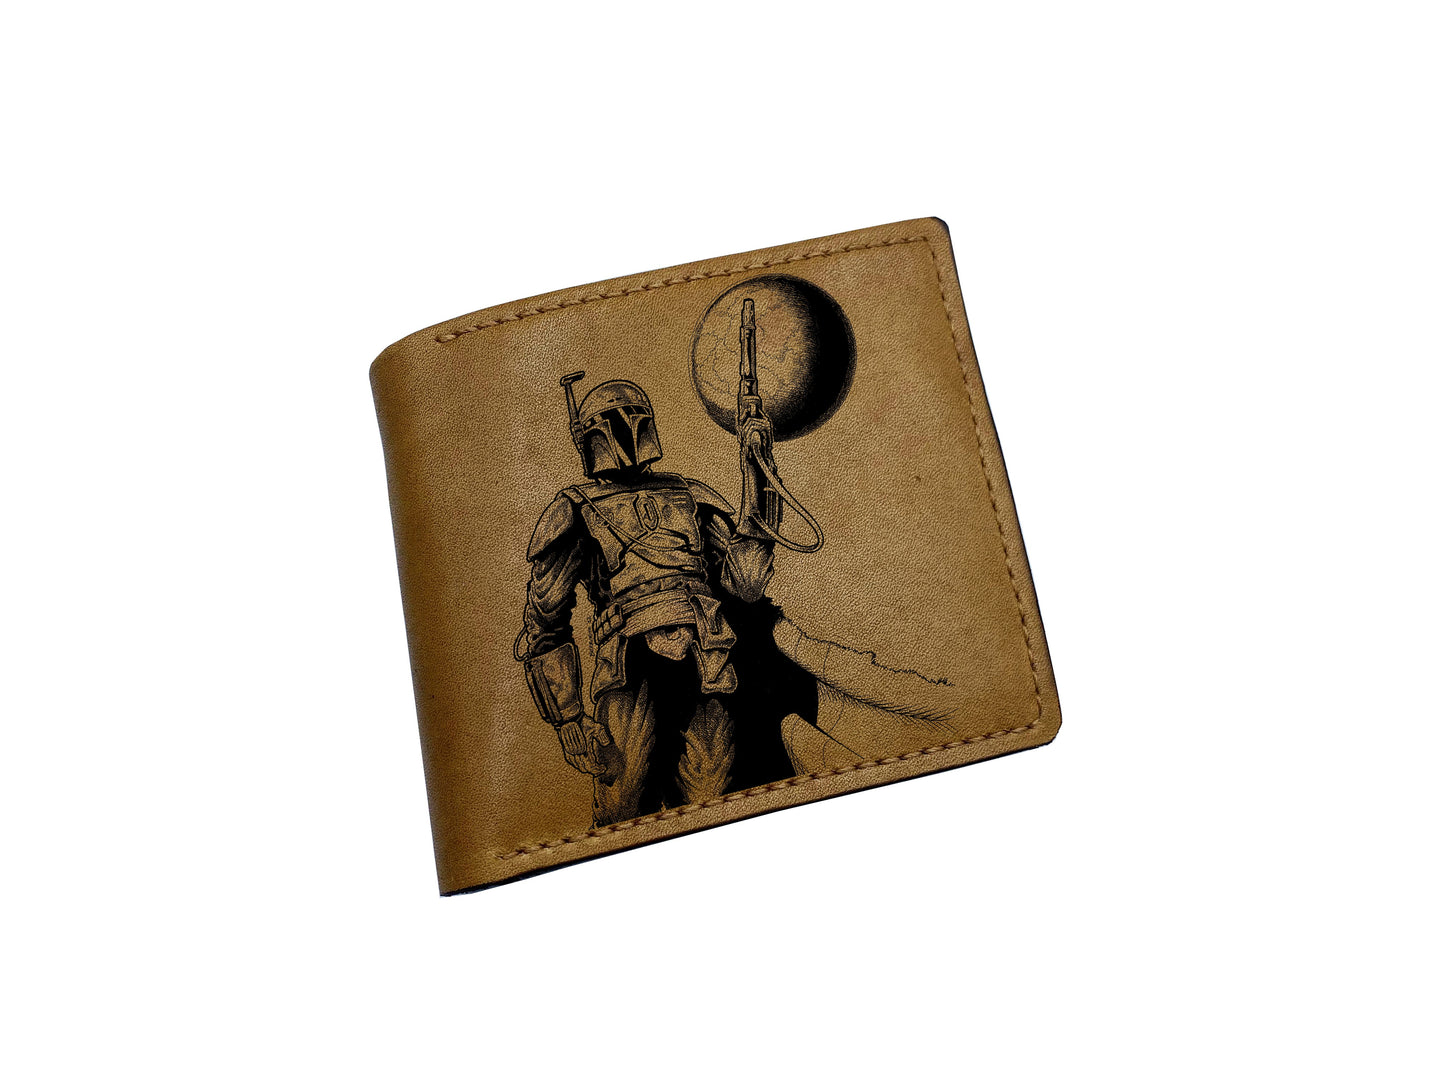 The Mandalorian leather men's wallet, custom leather wallet for him, gift for dad, starwars fanart present ideas, xmas gift ideas